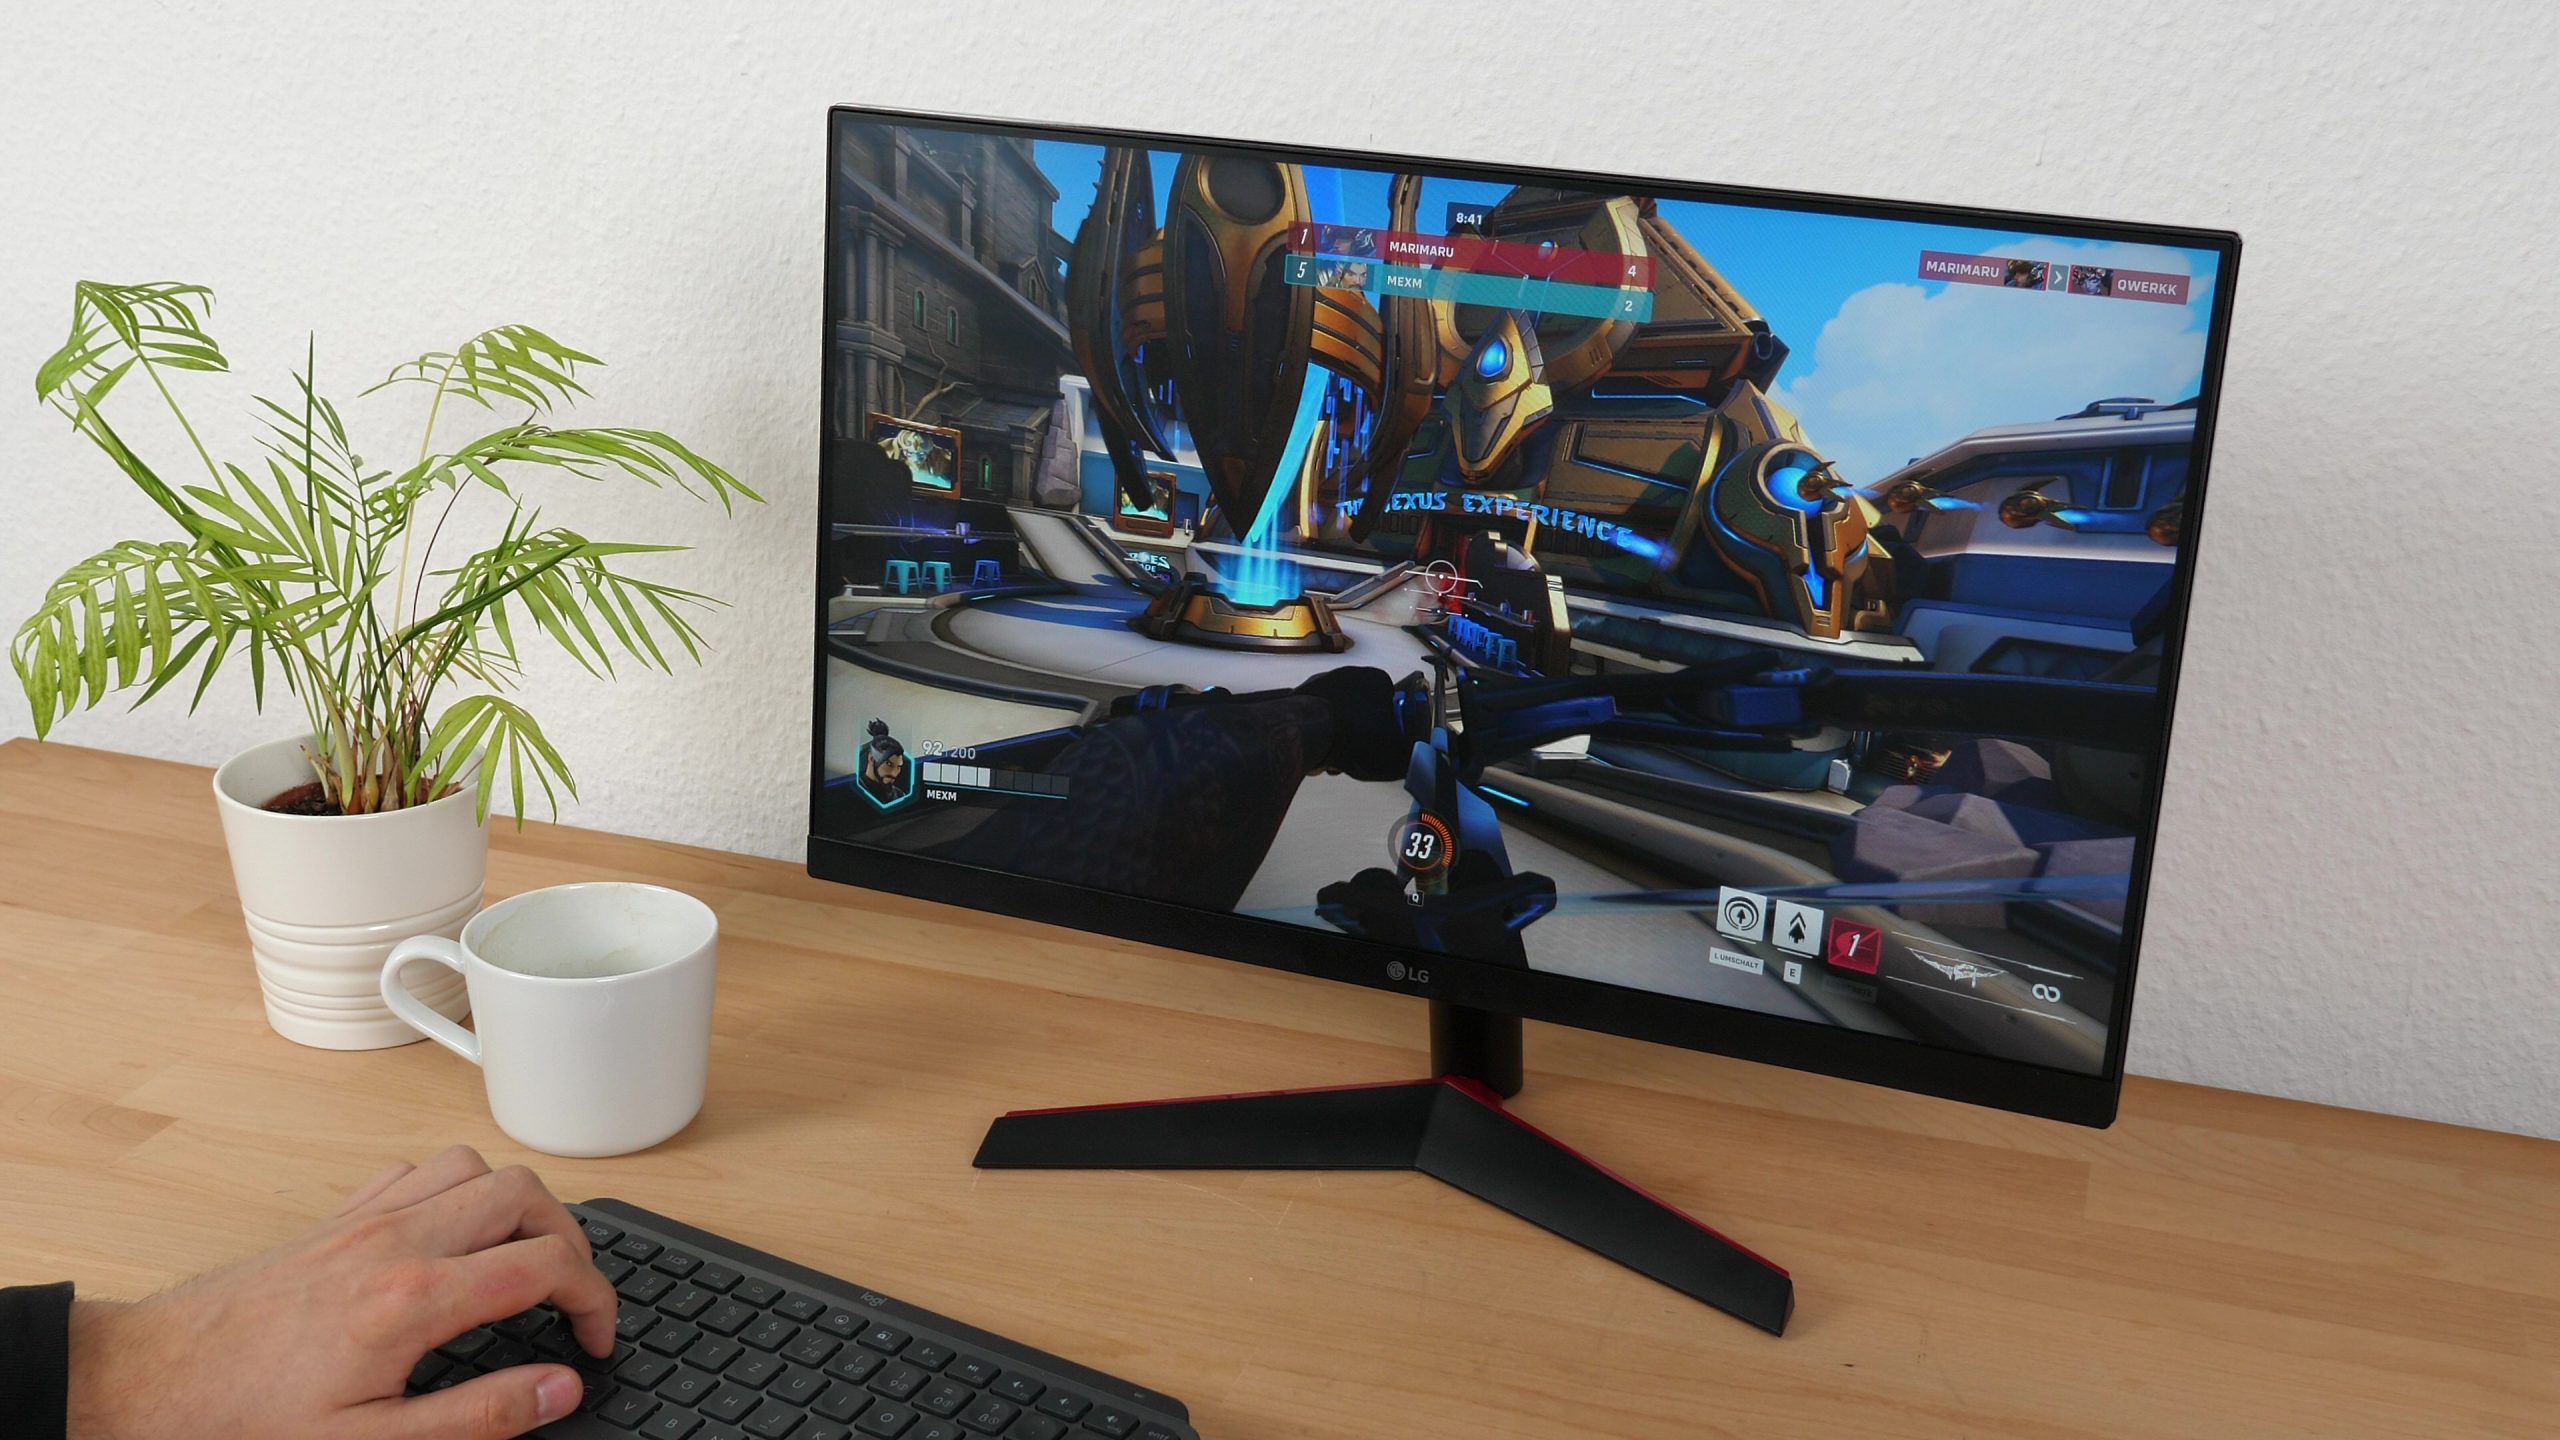 LG 24GN600-B Monitor Review ⇒ Our opinion • Monitorfindr